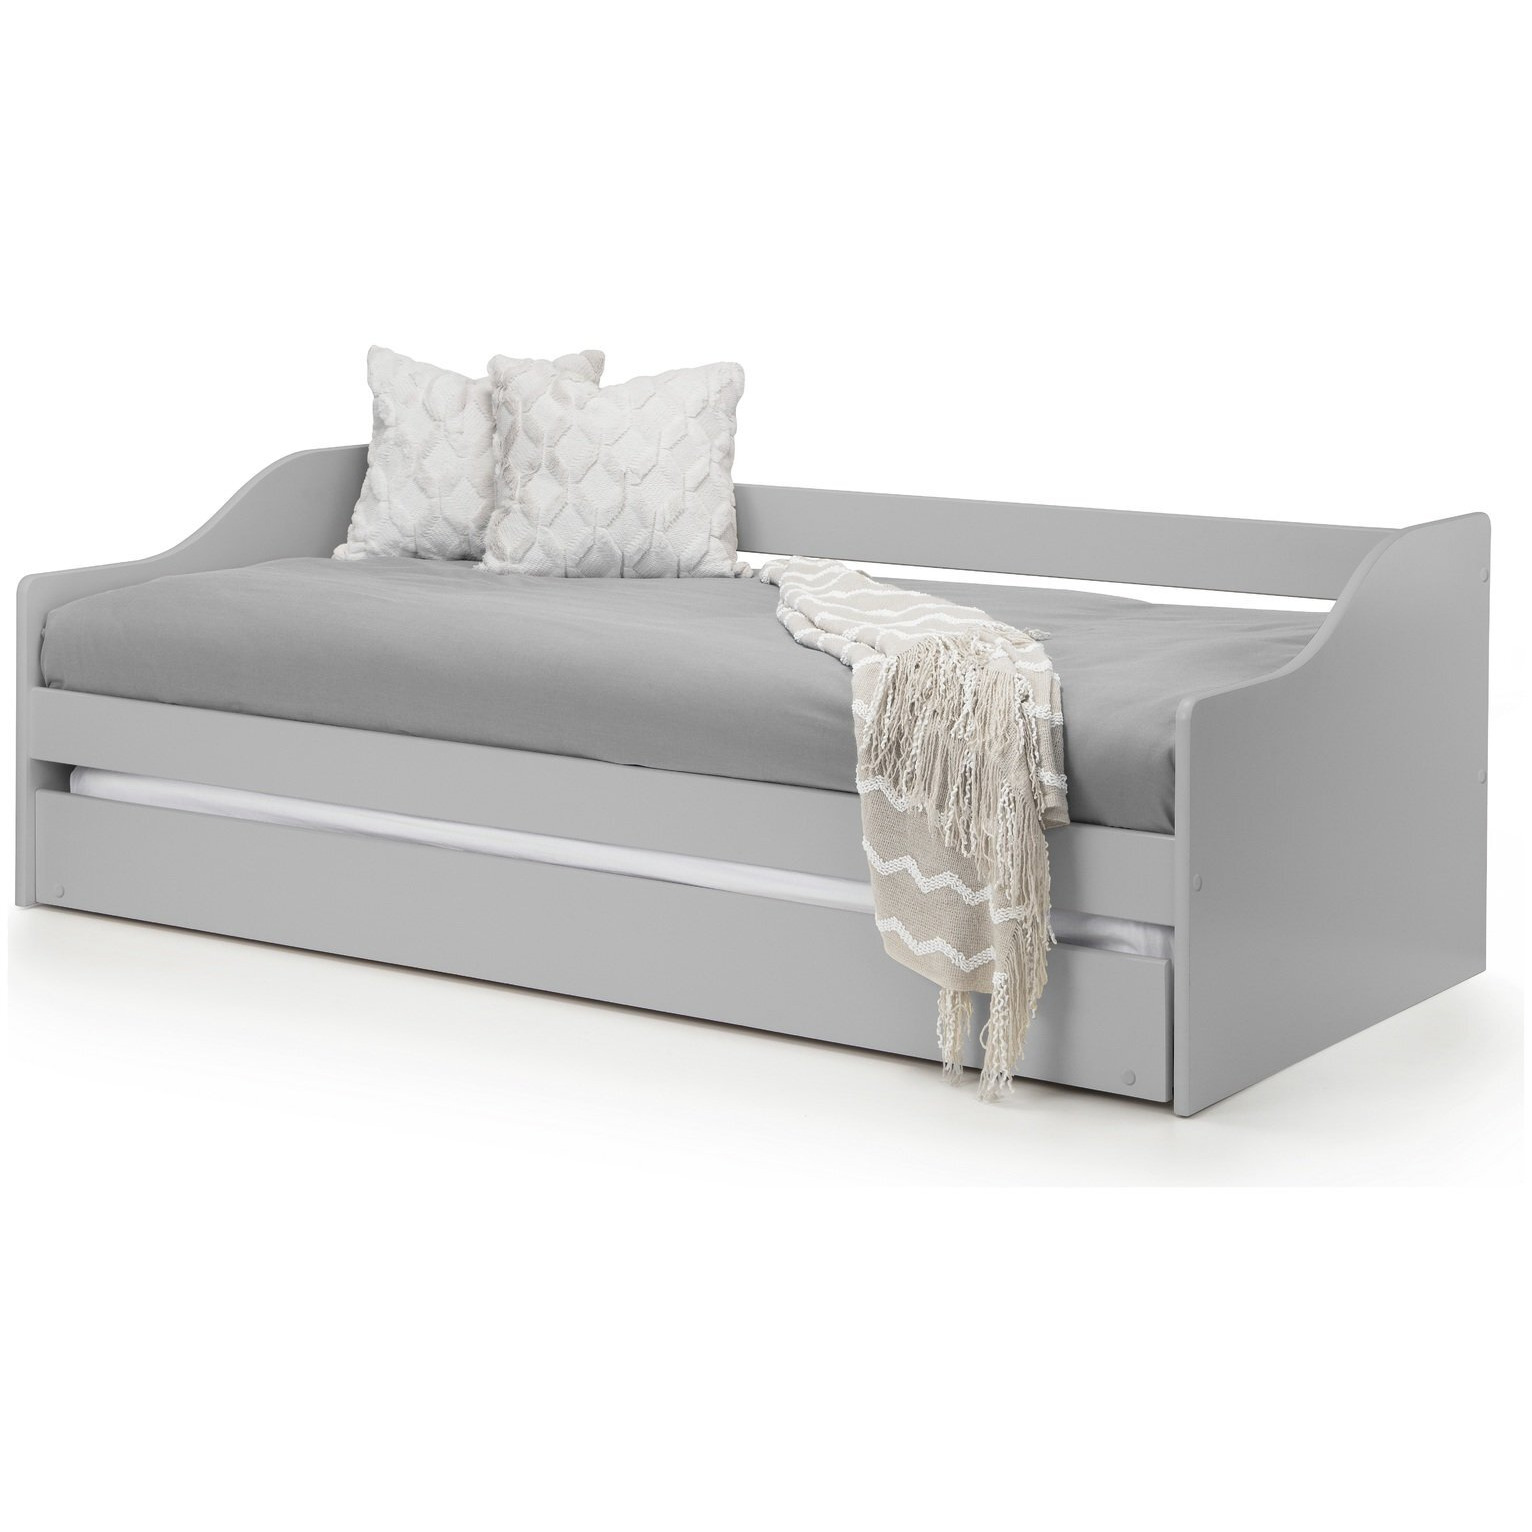 Julian Bowen Elba Wooden Day Bed with Trundle - Grey - image 1